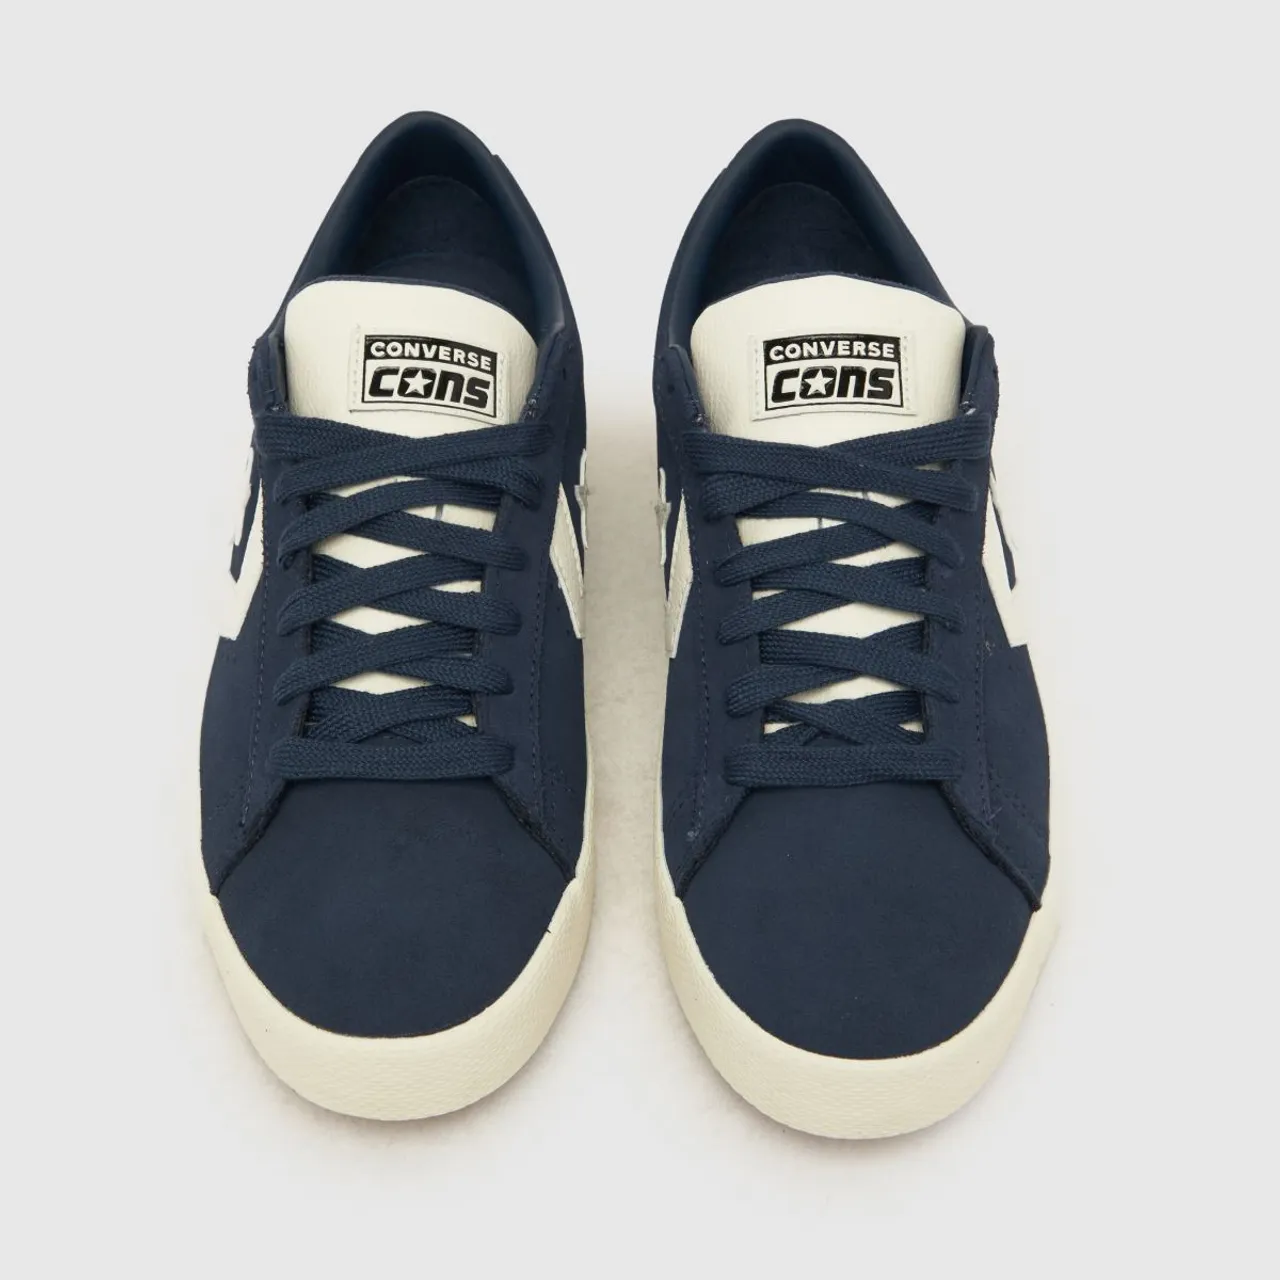 Converse pl Vulc pro Trainers in Navy & White